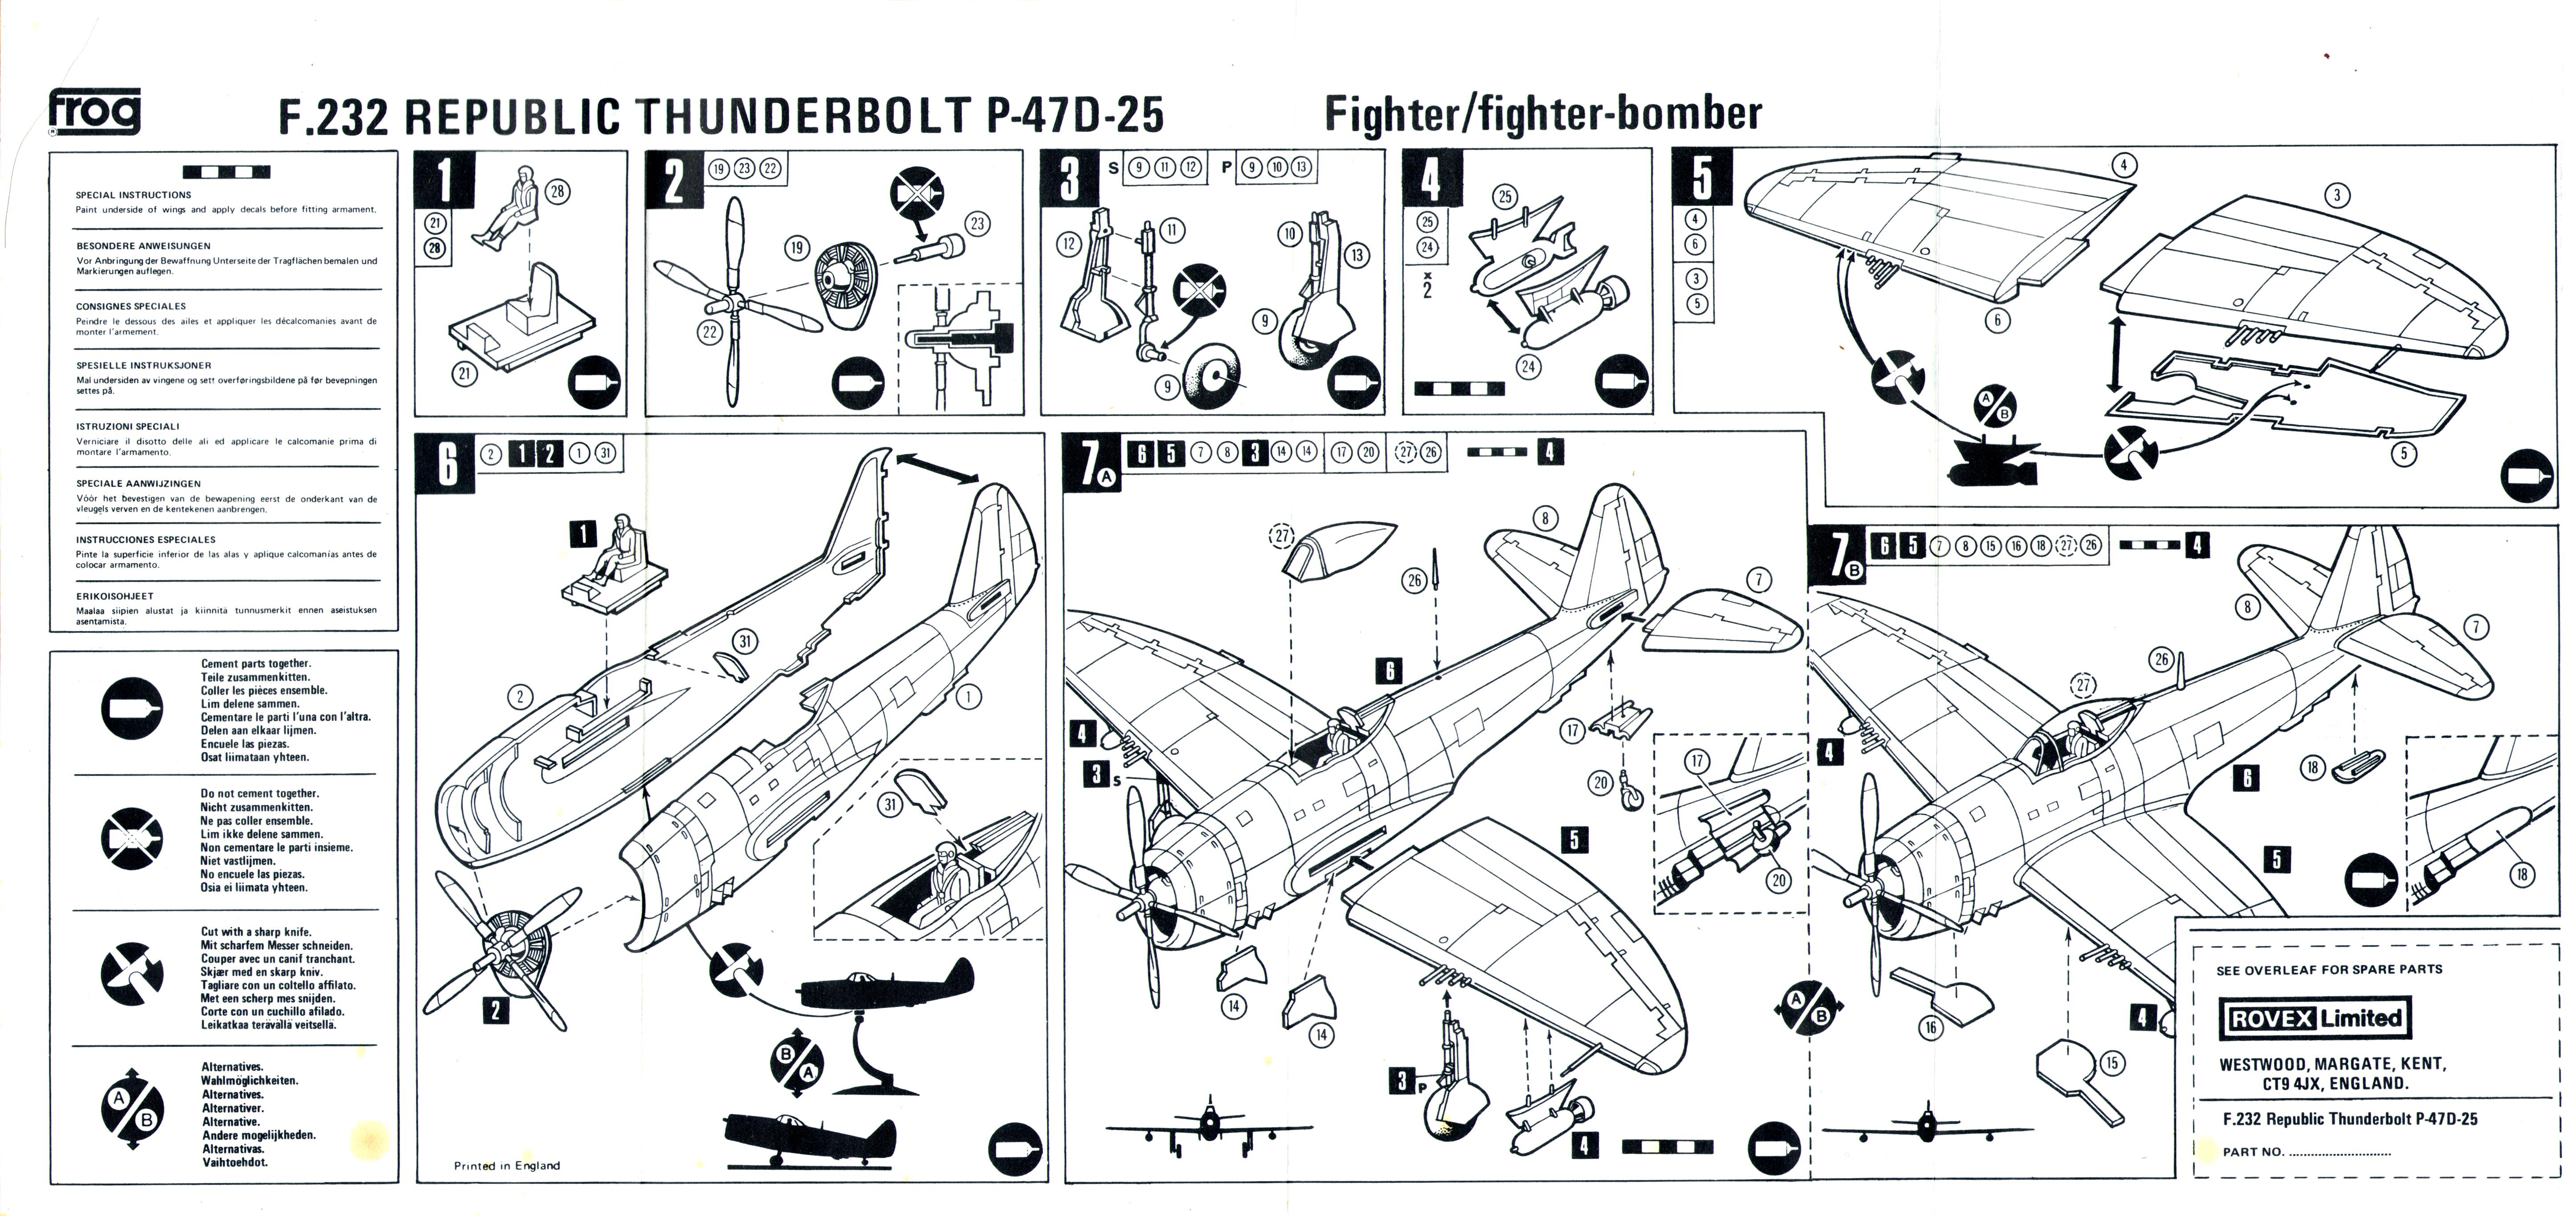 FROG F232 Red Series Thunderbolt - Fighter Bomber, Rovex Models & Hobbies, 1975, assembly instructions